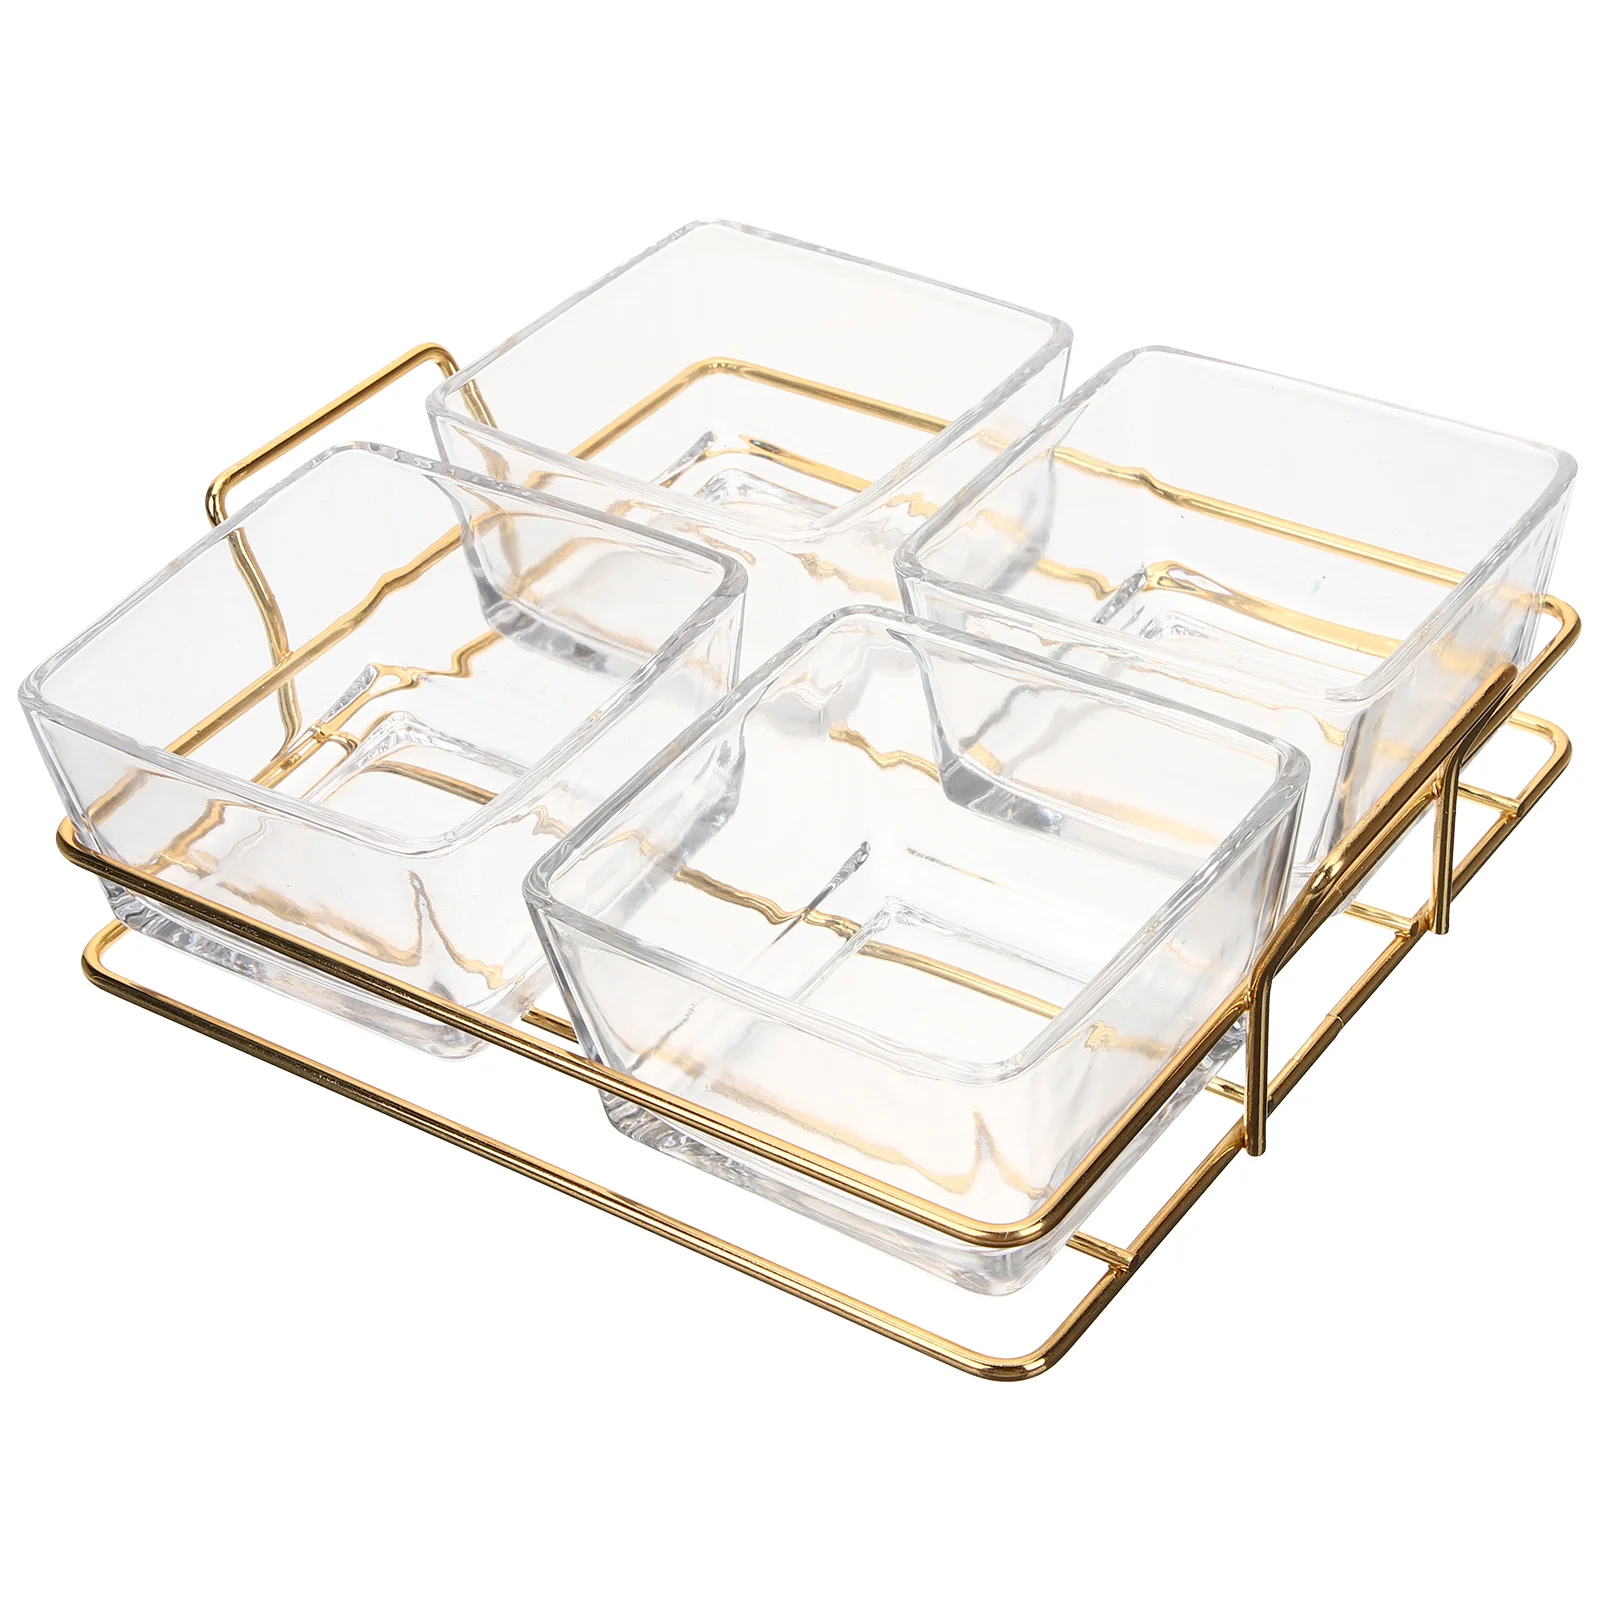 

Tray Dessert Fruit Serving Plates Snack Dish Plate Appetizer Dry Candy Dried Platter Party Container Nut Holder Storage Trays